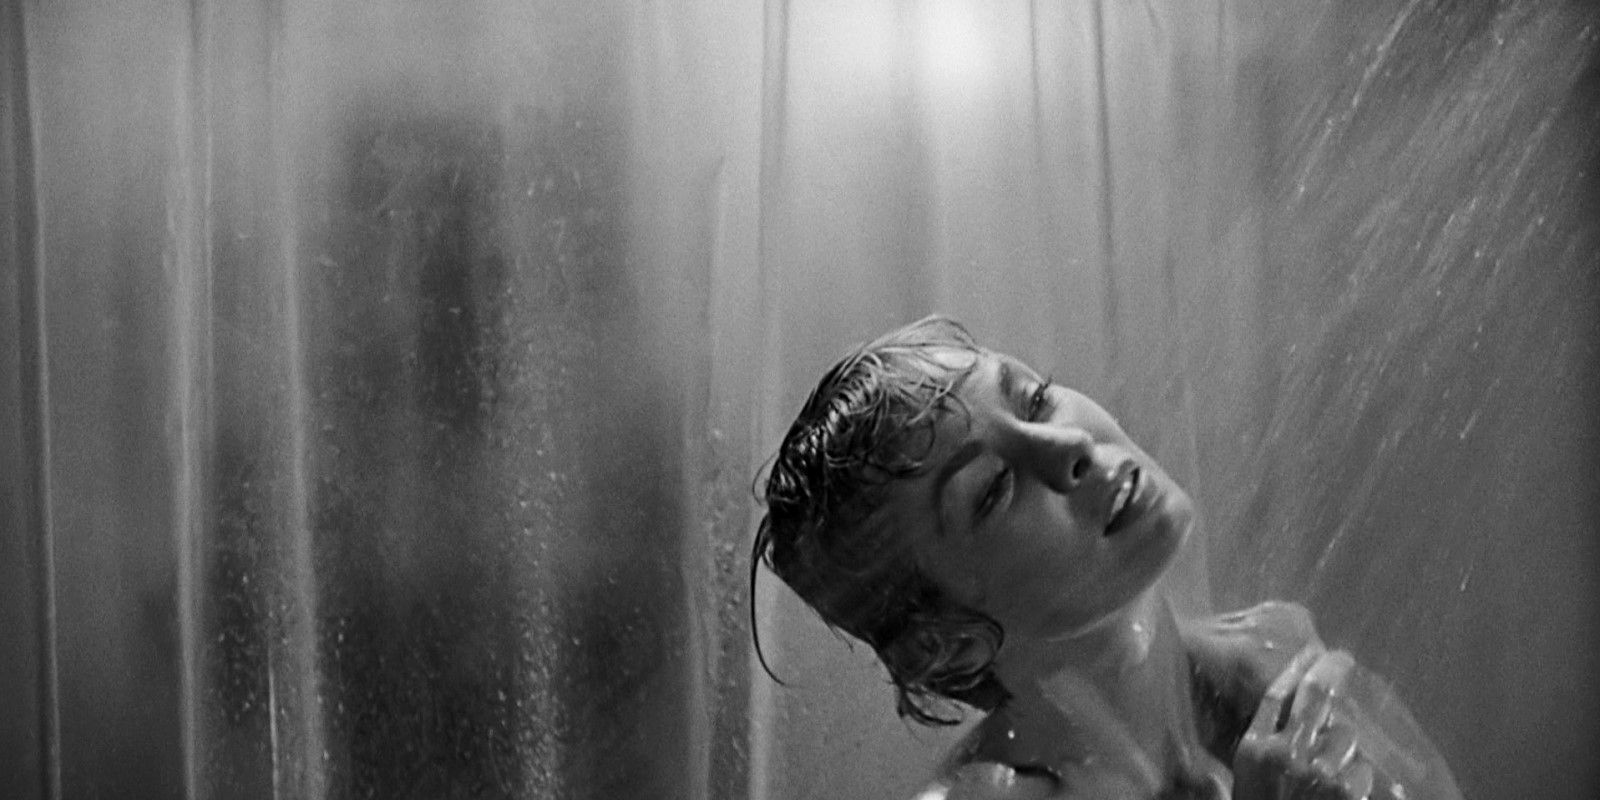 Marion Crane (Janet Leigh) taking a shower as a shadow approaches in 'Psycho'